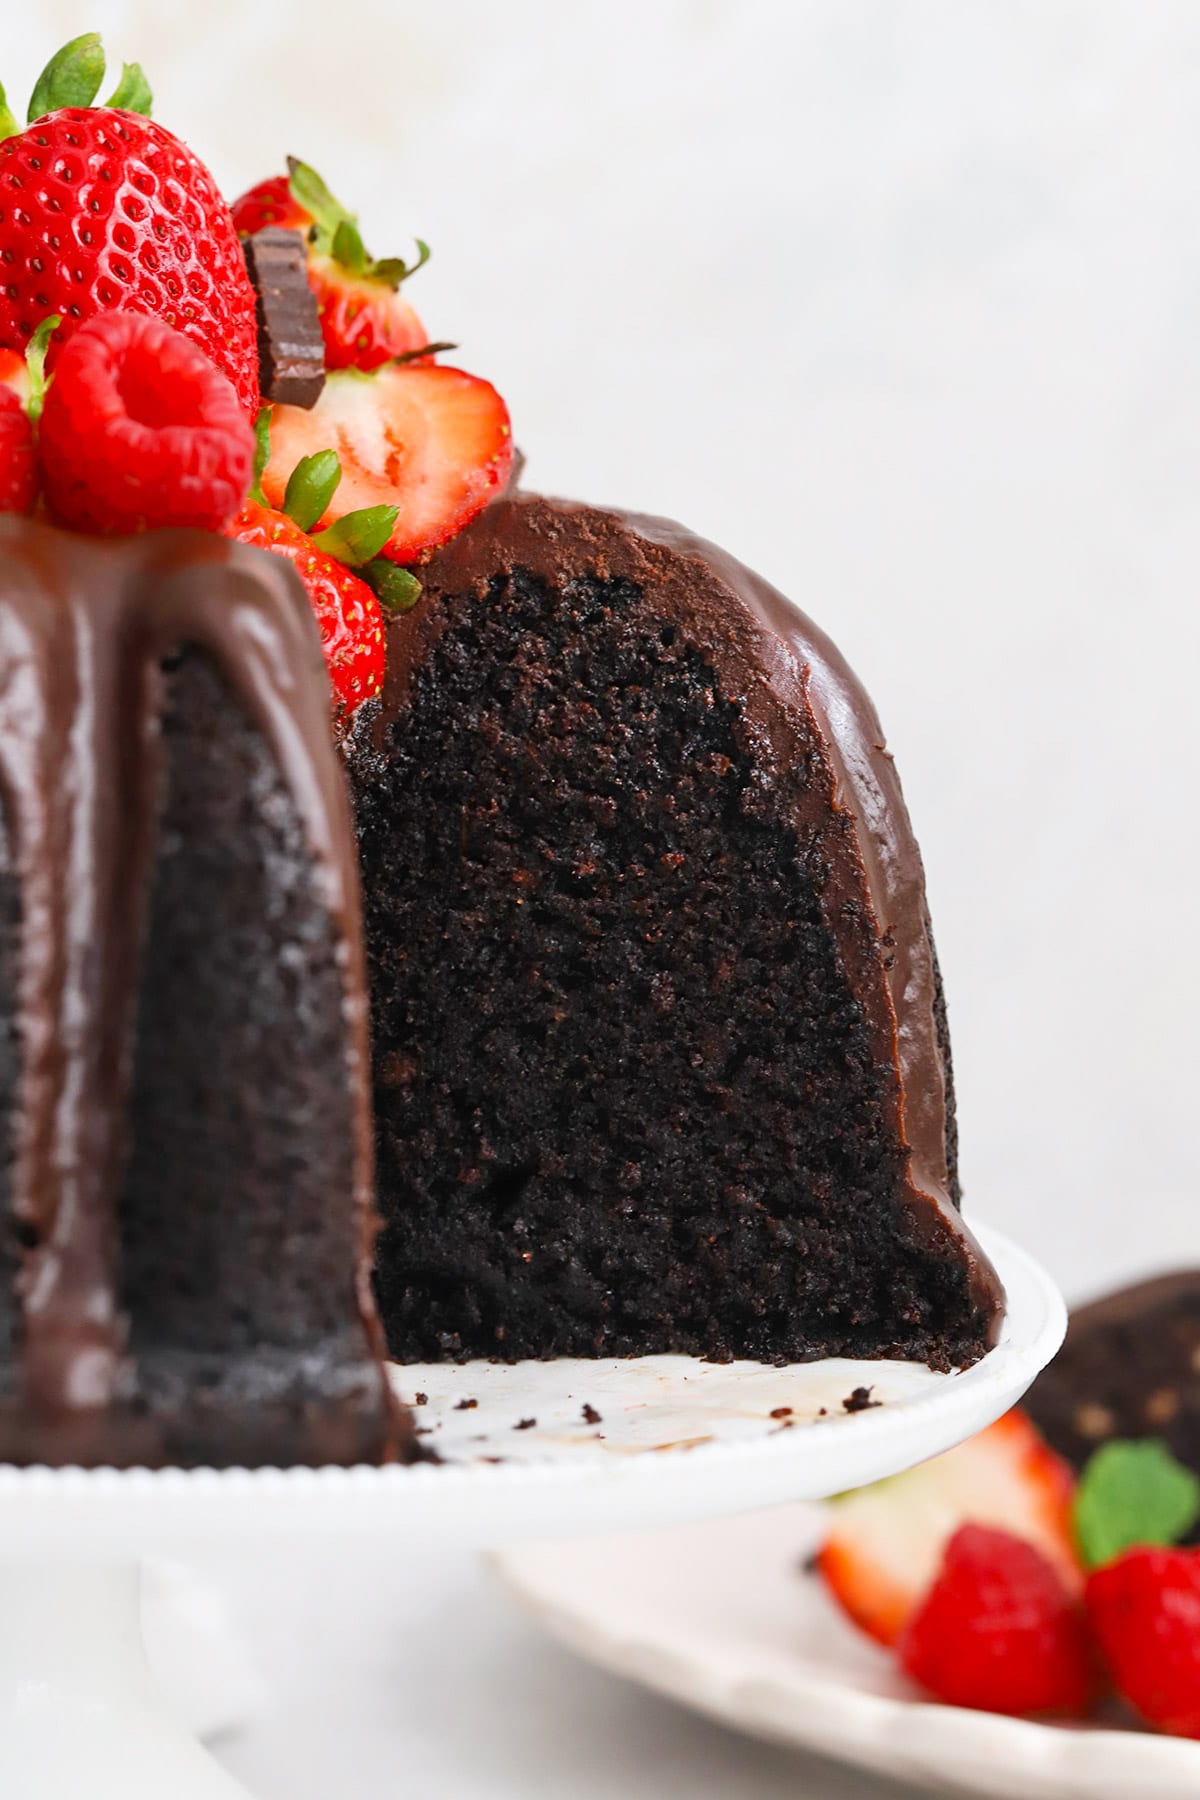 Front view of a chocolate bundt cake with a slice out of it, revealing a tender, perfectly cooked center